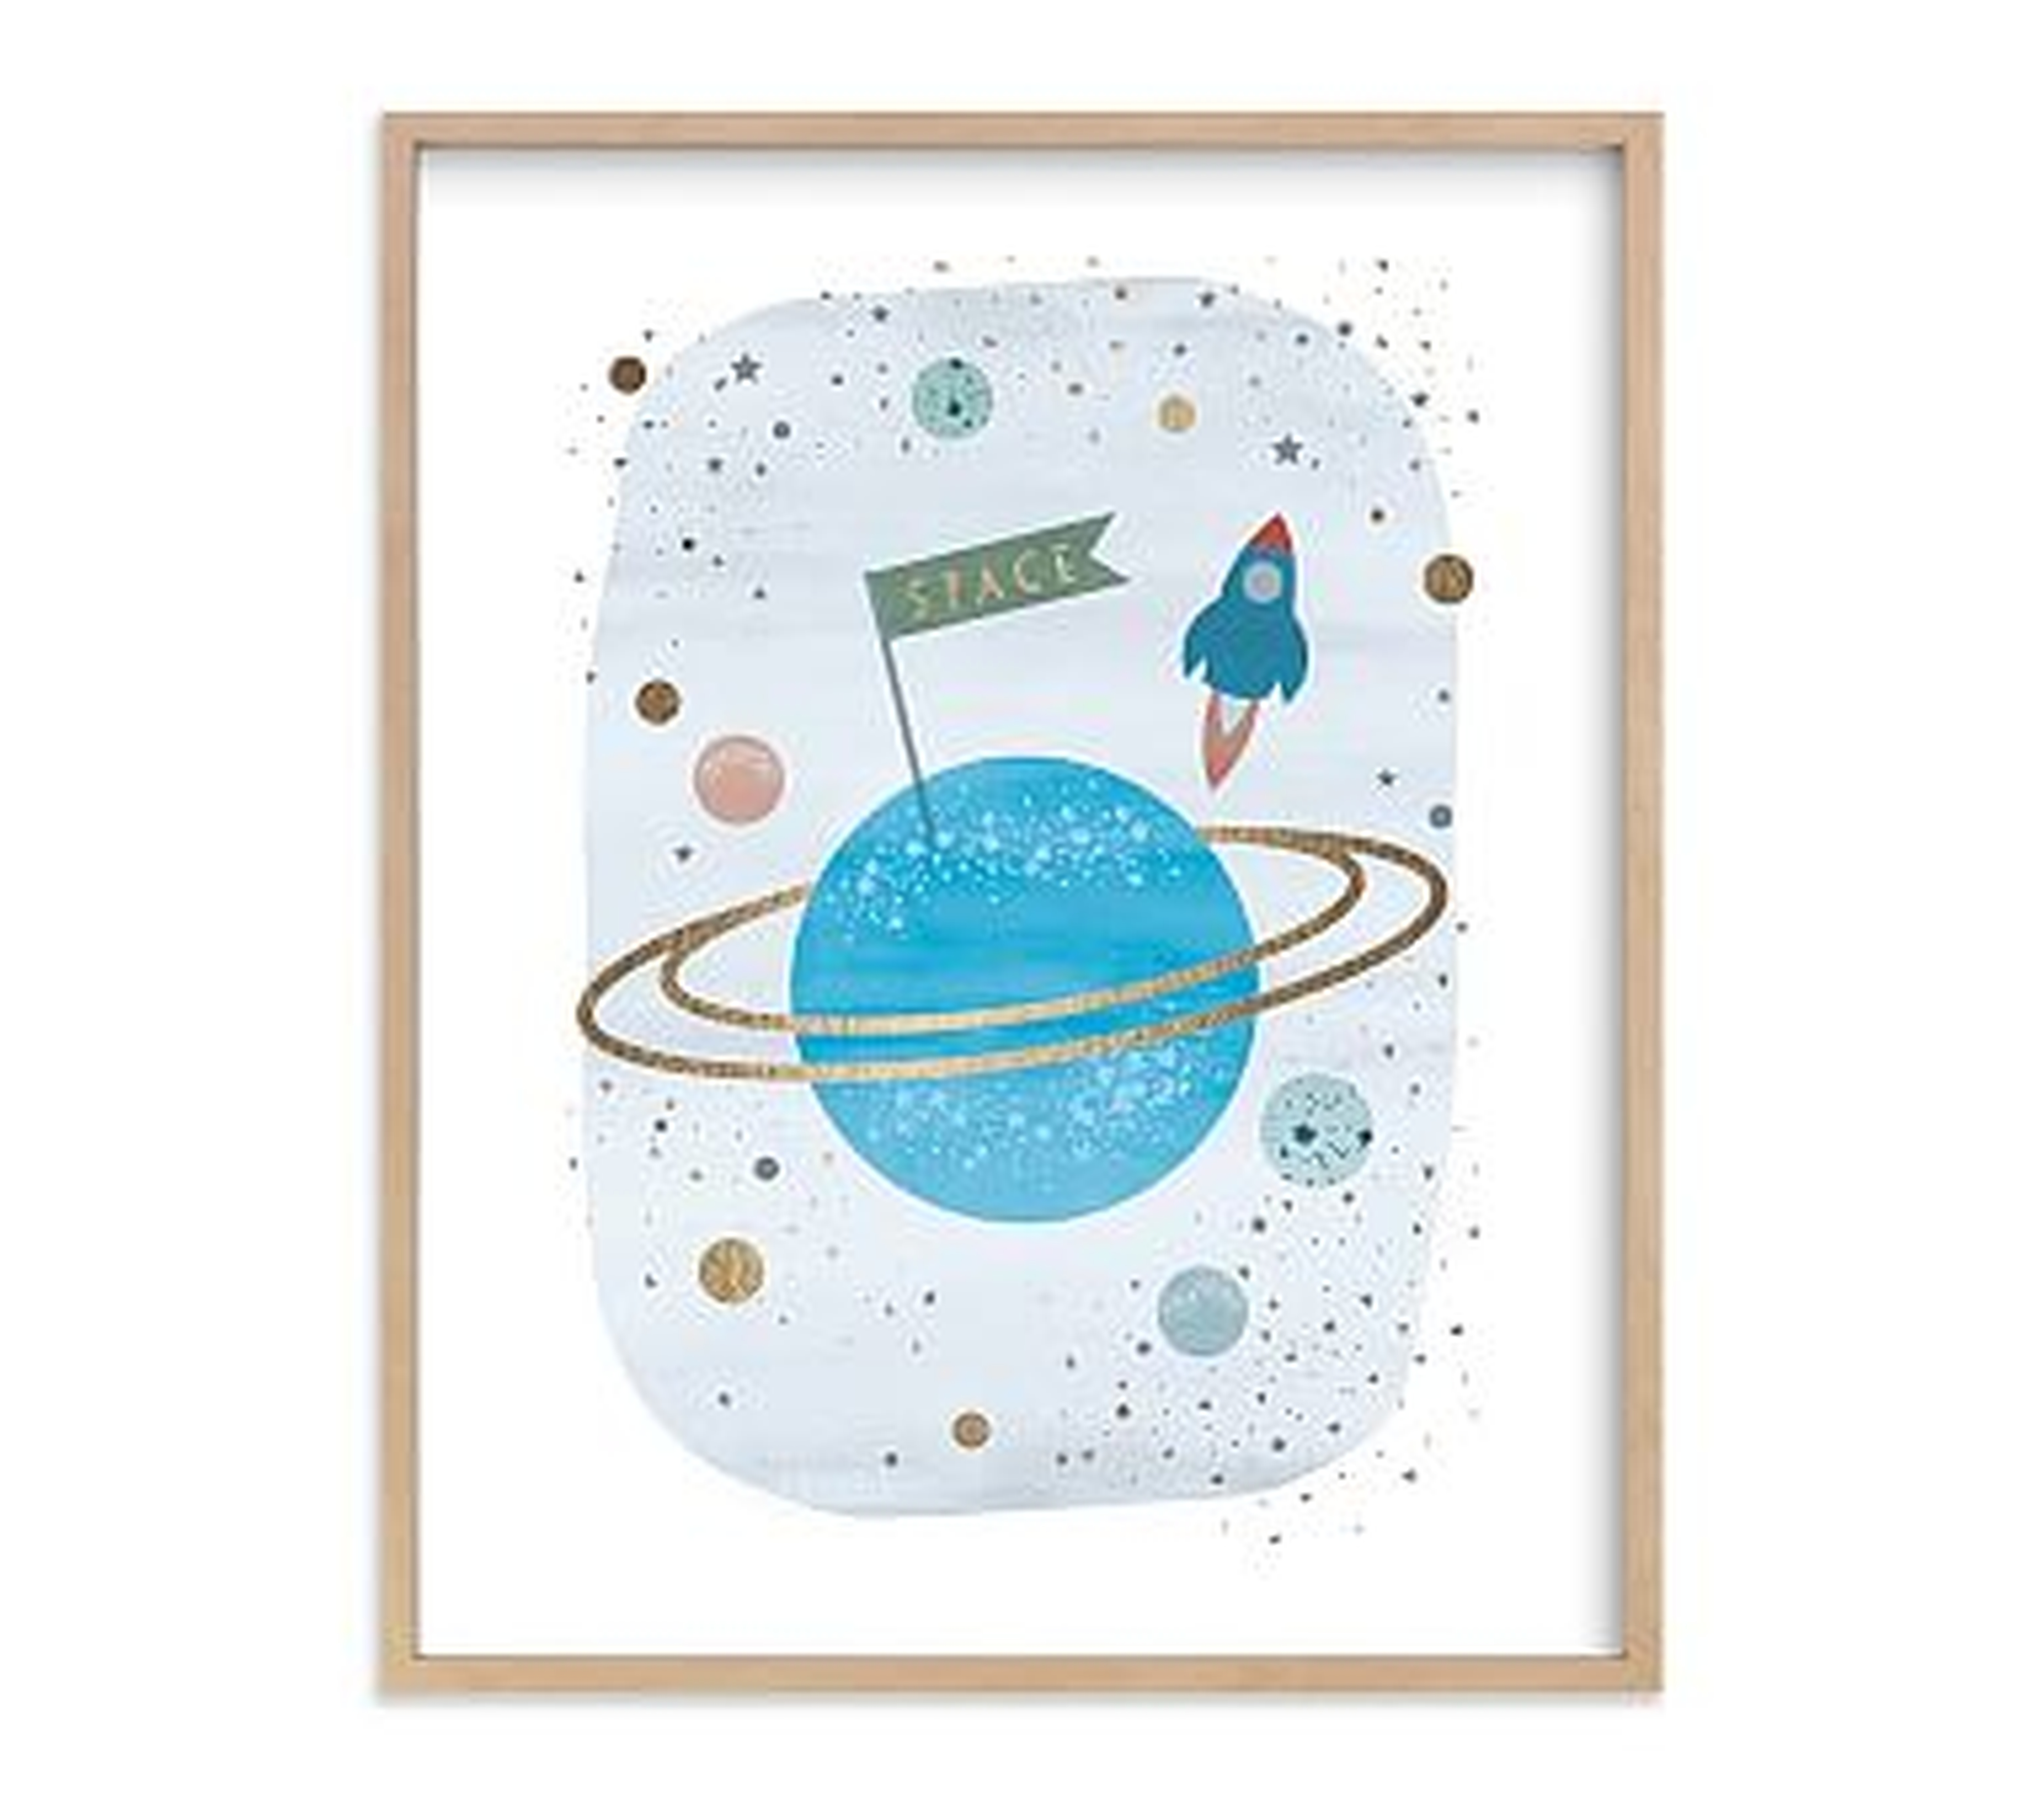 Outer Space Wall Art by Minted(R), 16x20, Natural - Pottery Barn Kids